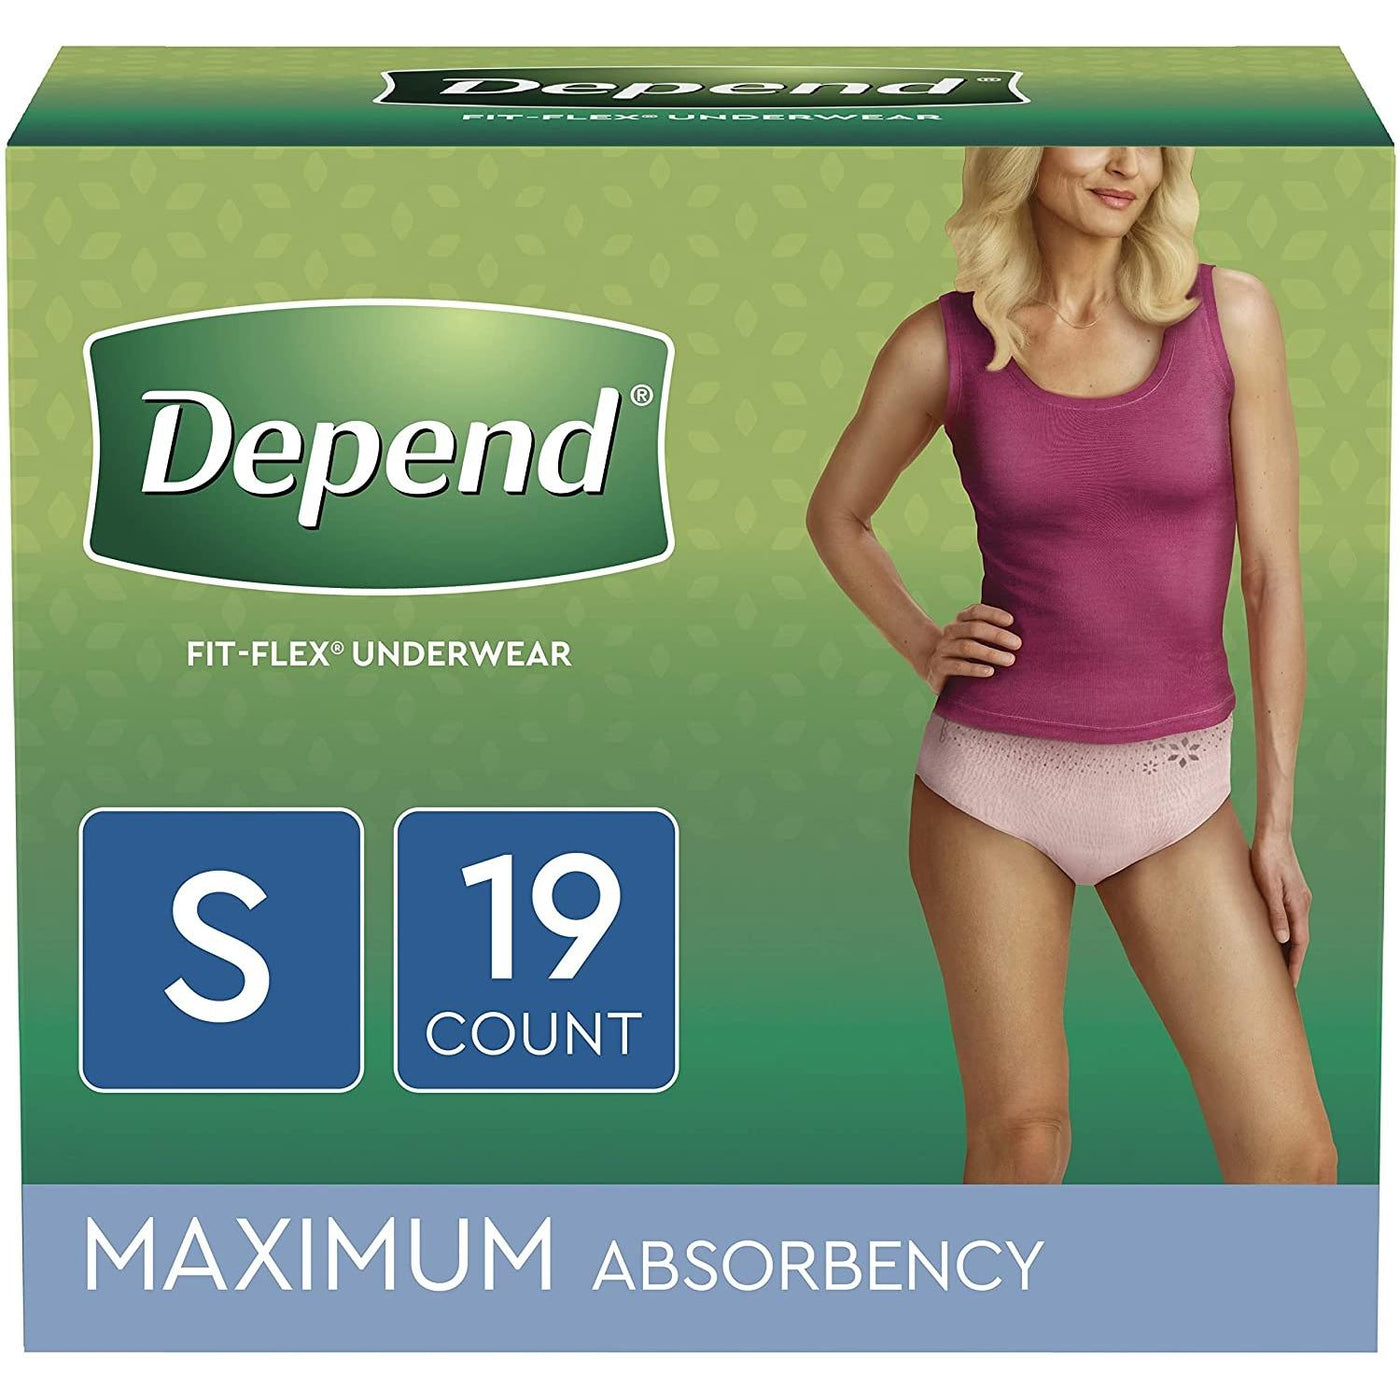 Urinary Incontinence Underwear to Assist You with Leakage – SRC Health